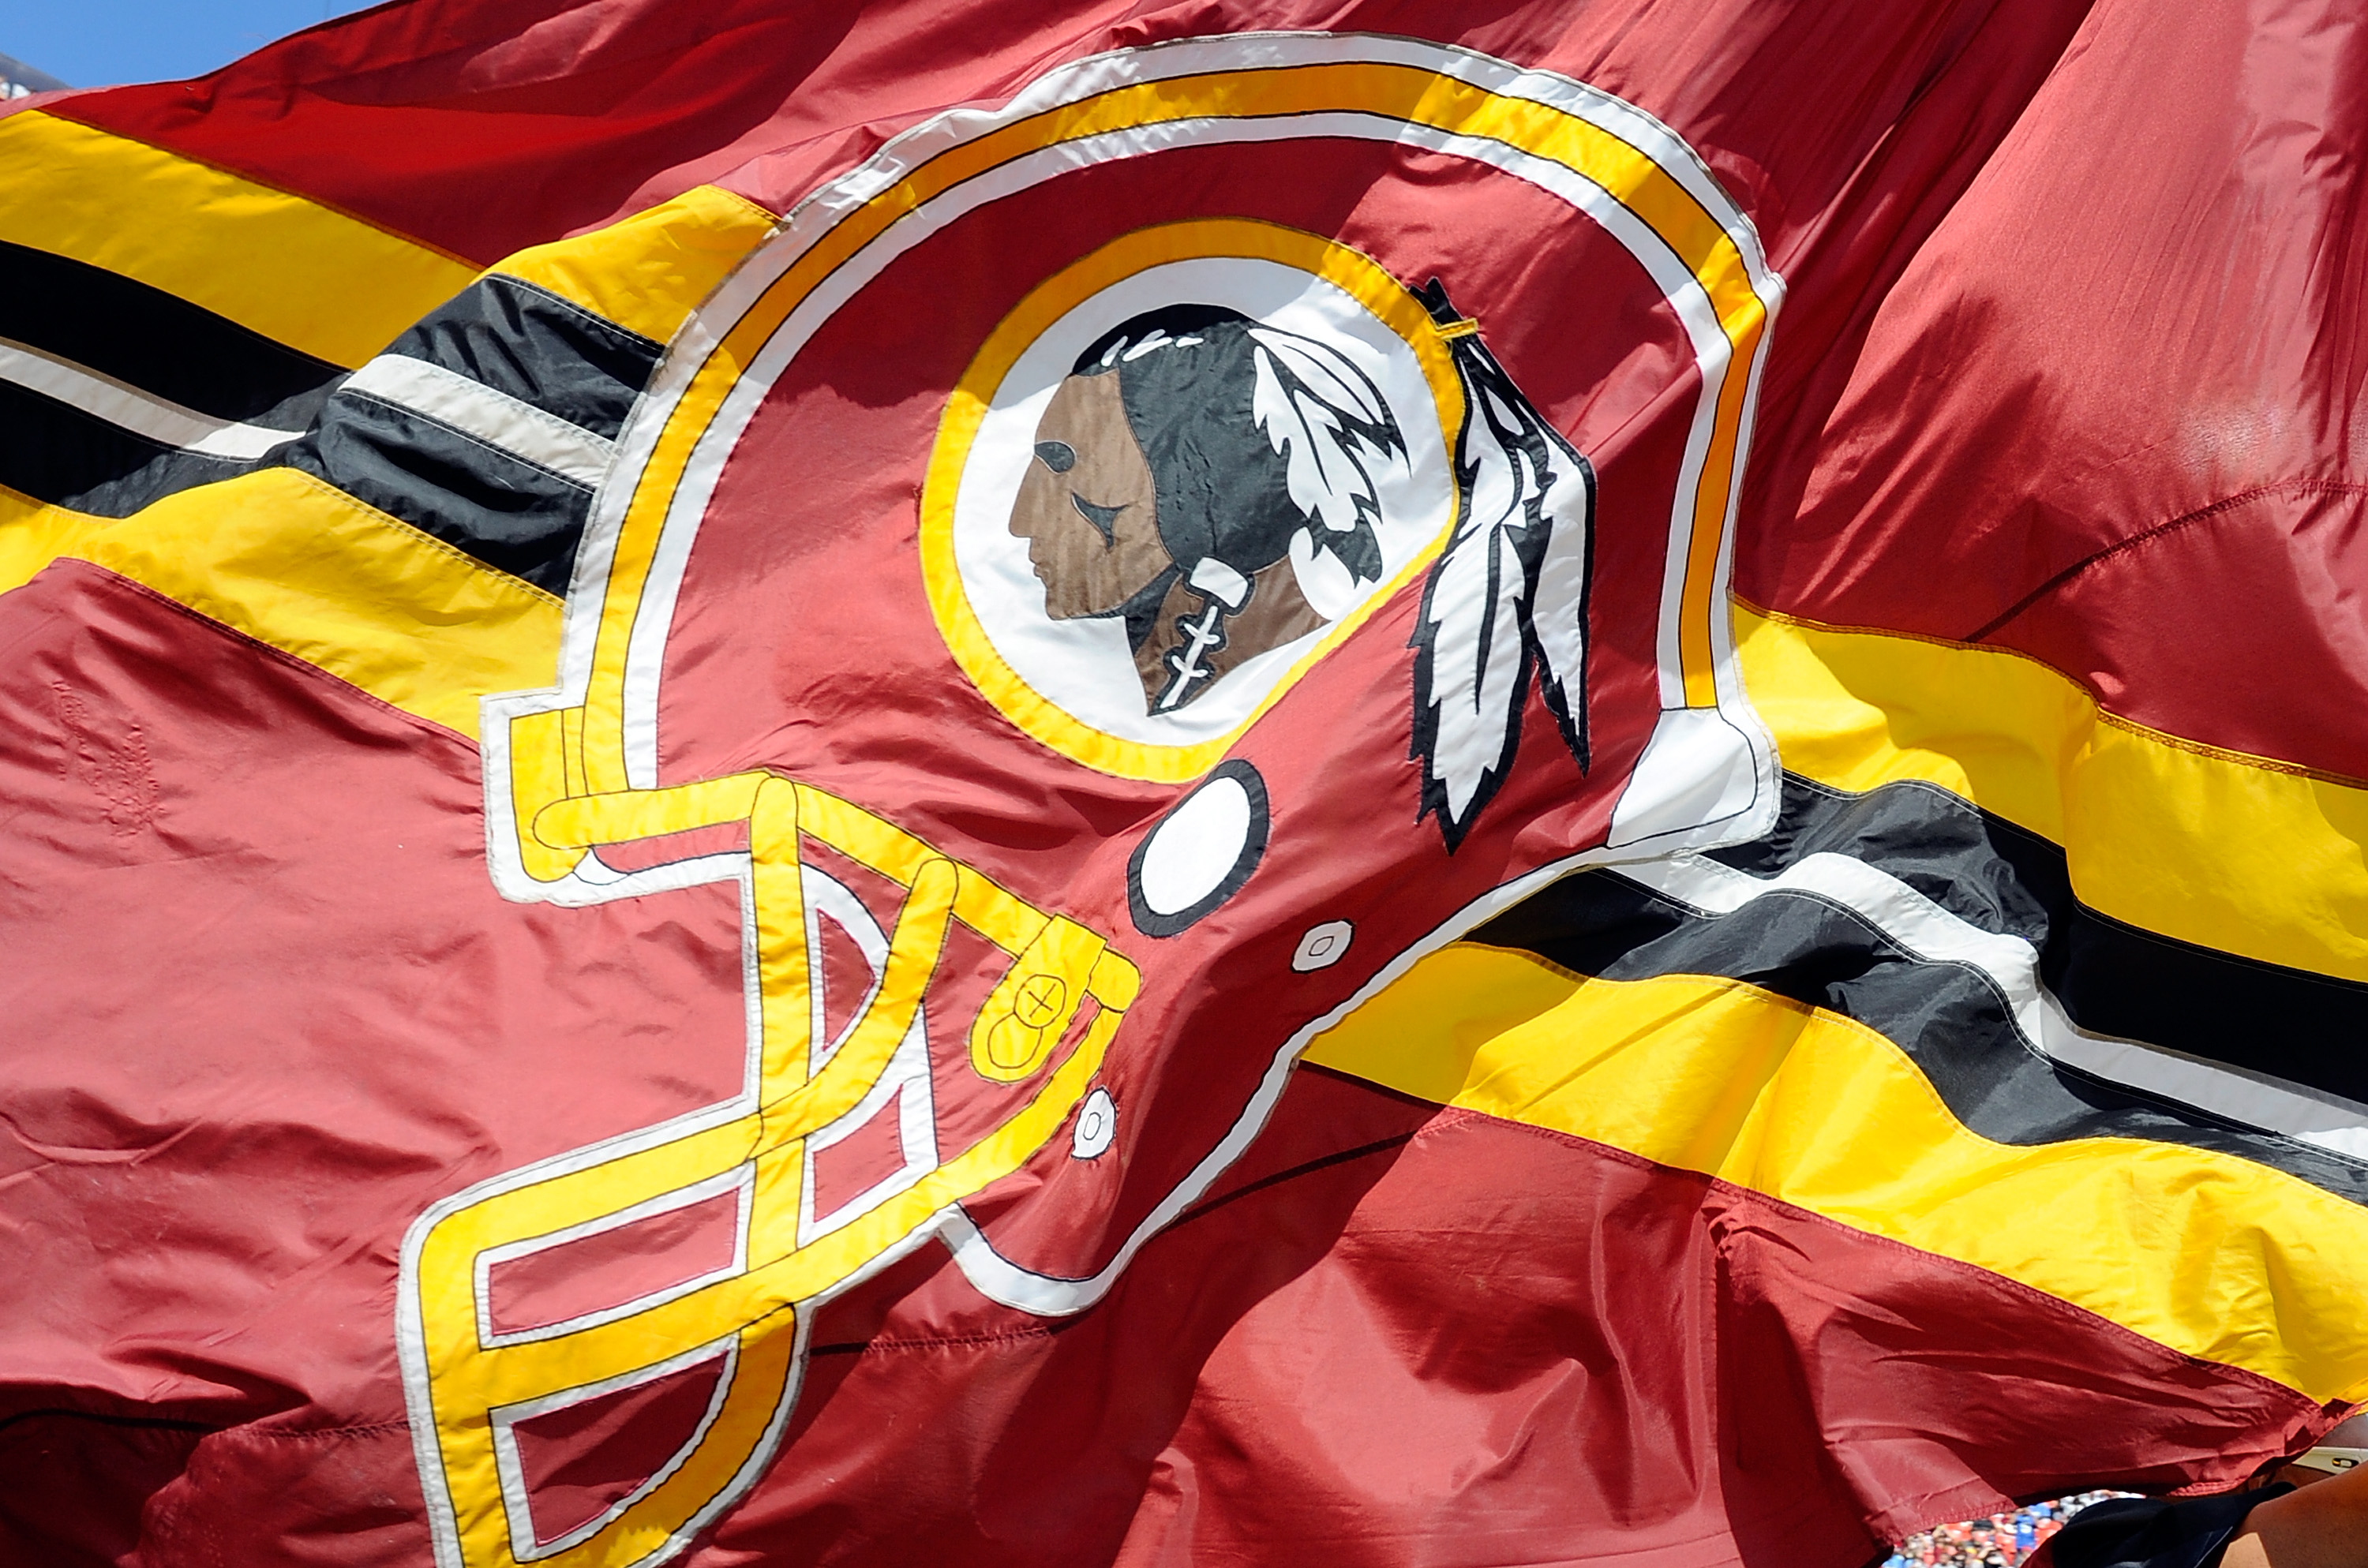 A Washington Redskins flag on the field before the game against the Detroit Lions at FedExField on September 22, 2013 in Landover, Maryland. (G Fiume/Getty Images)